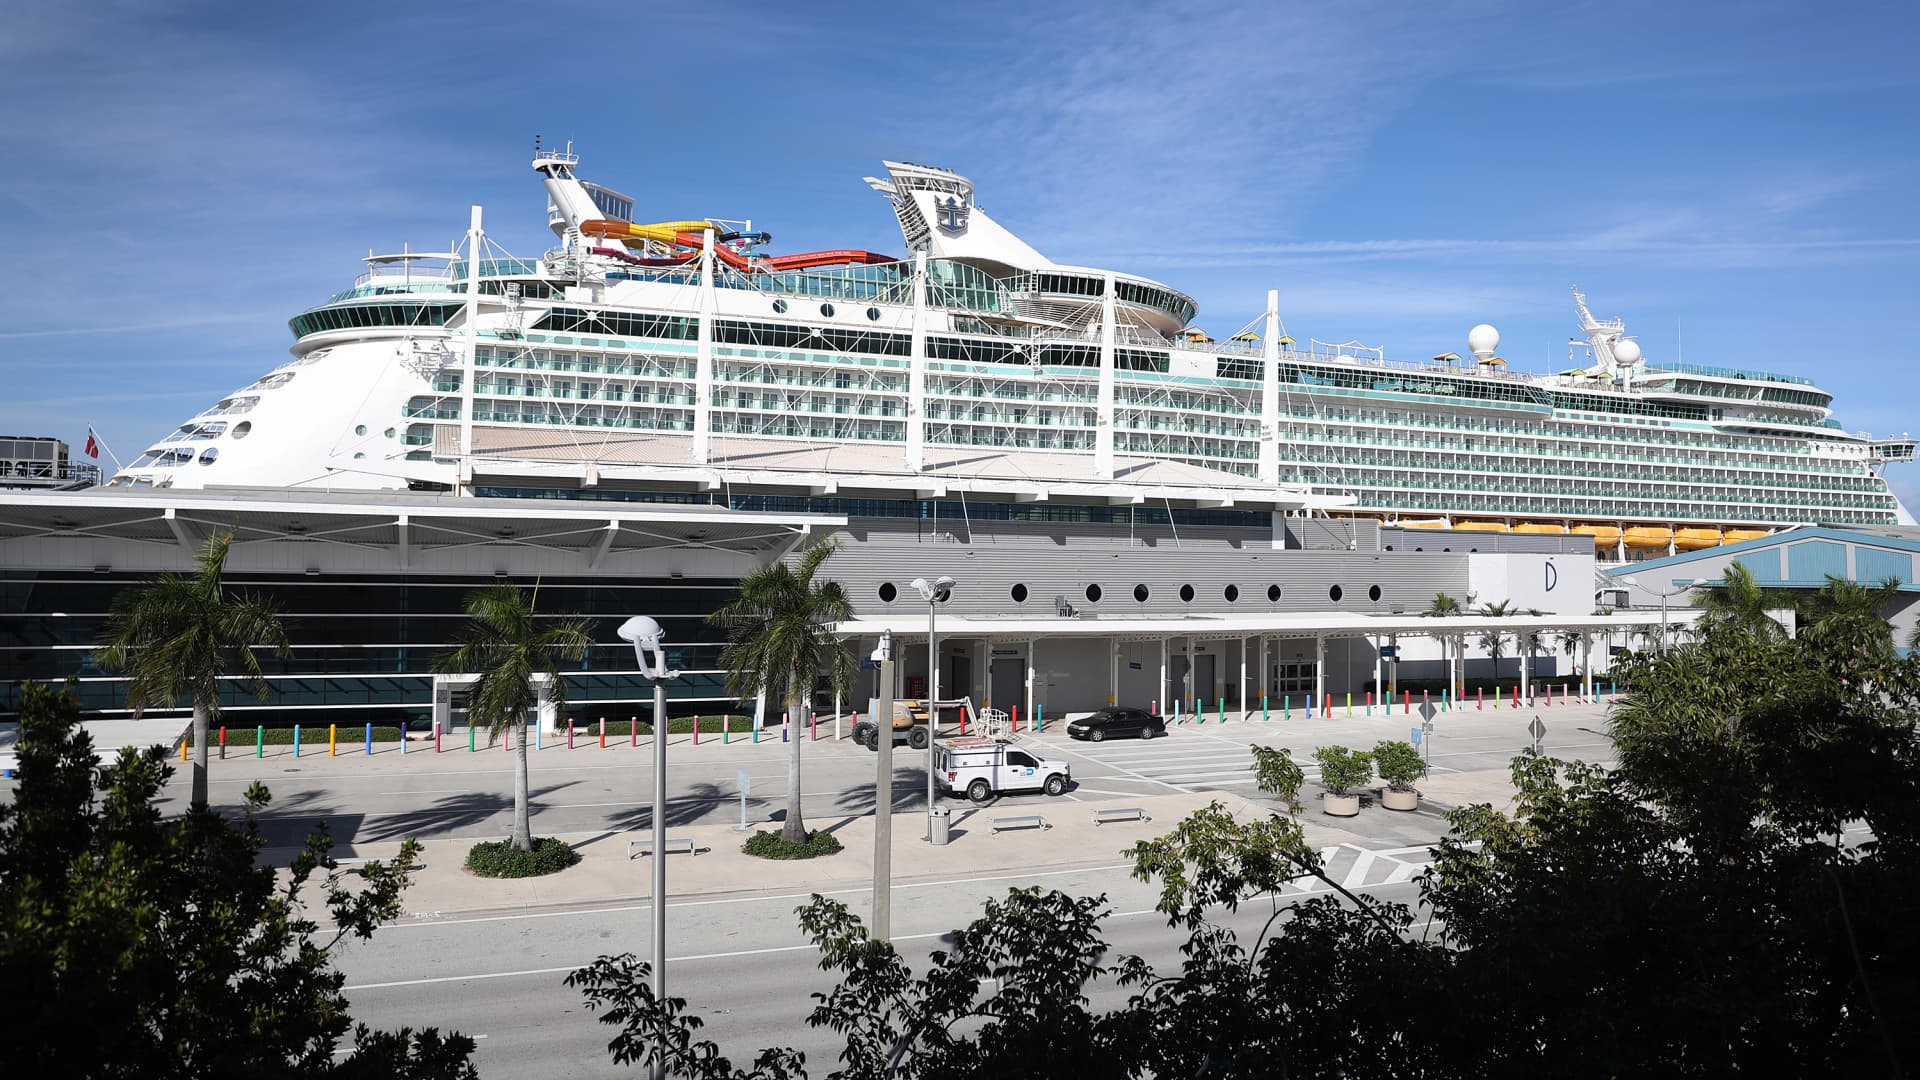 Royal Caribbean’s Navigator of the Sea cruise ship is docked at PortMiami on March 2, 2021 in Miami, Florida.